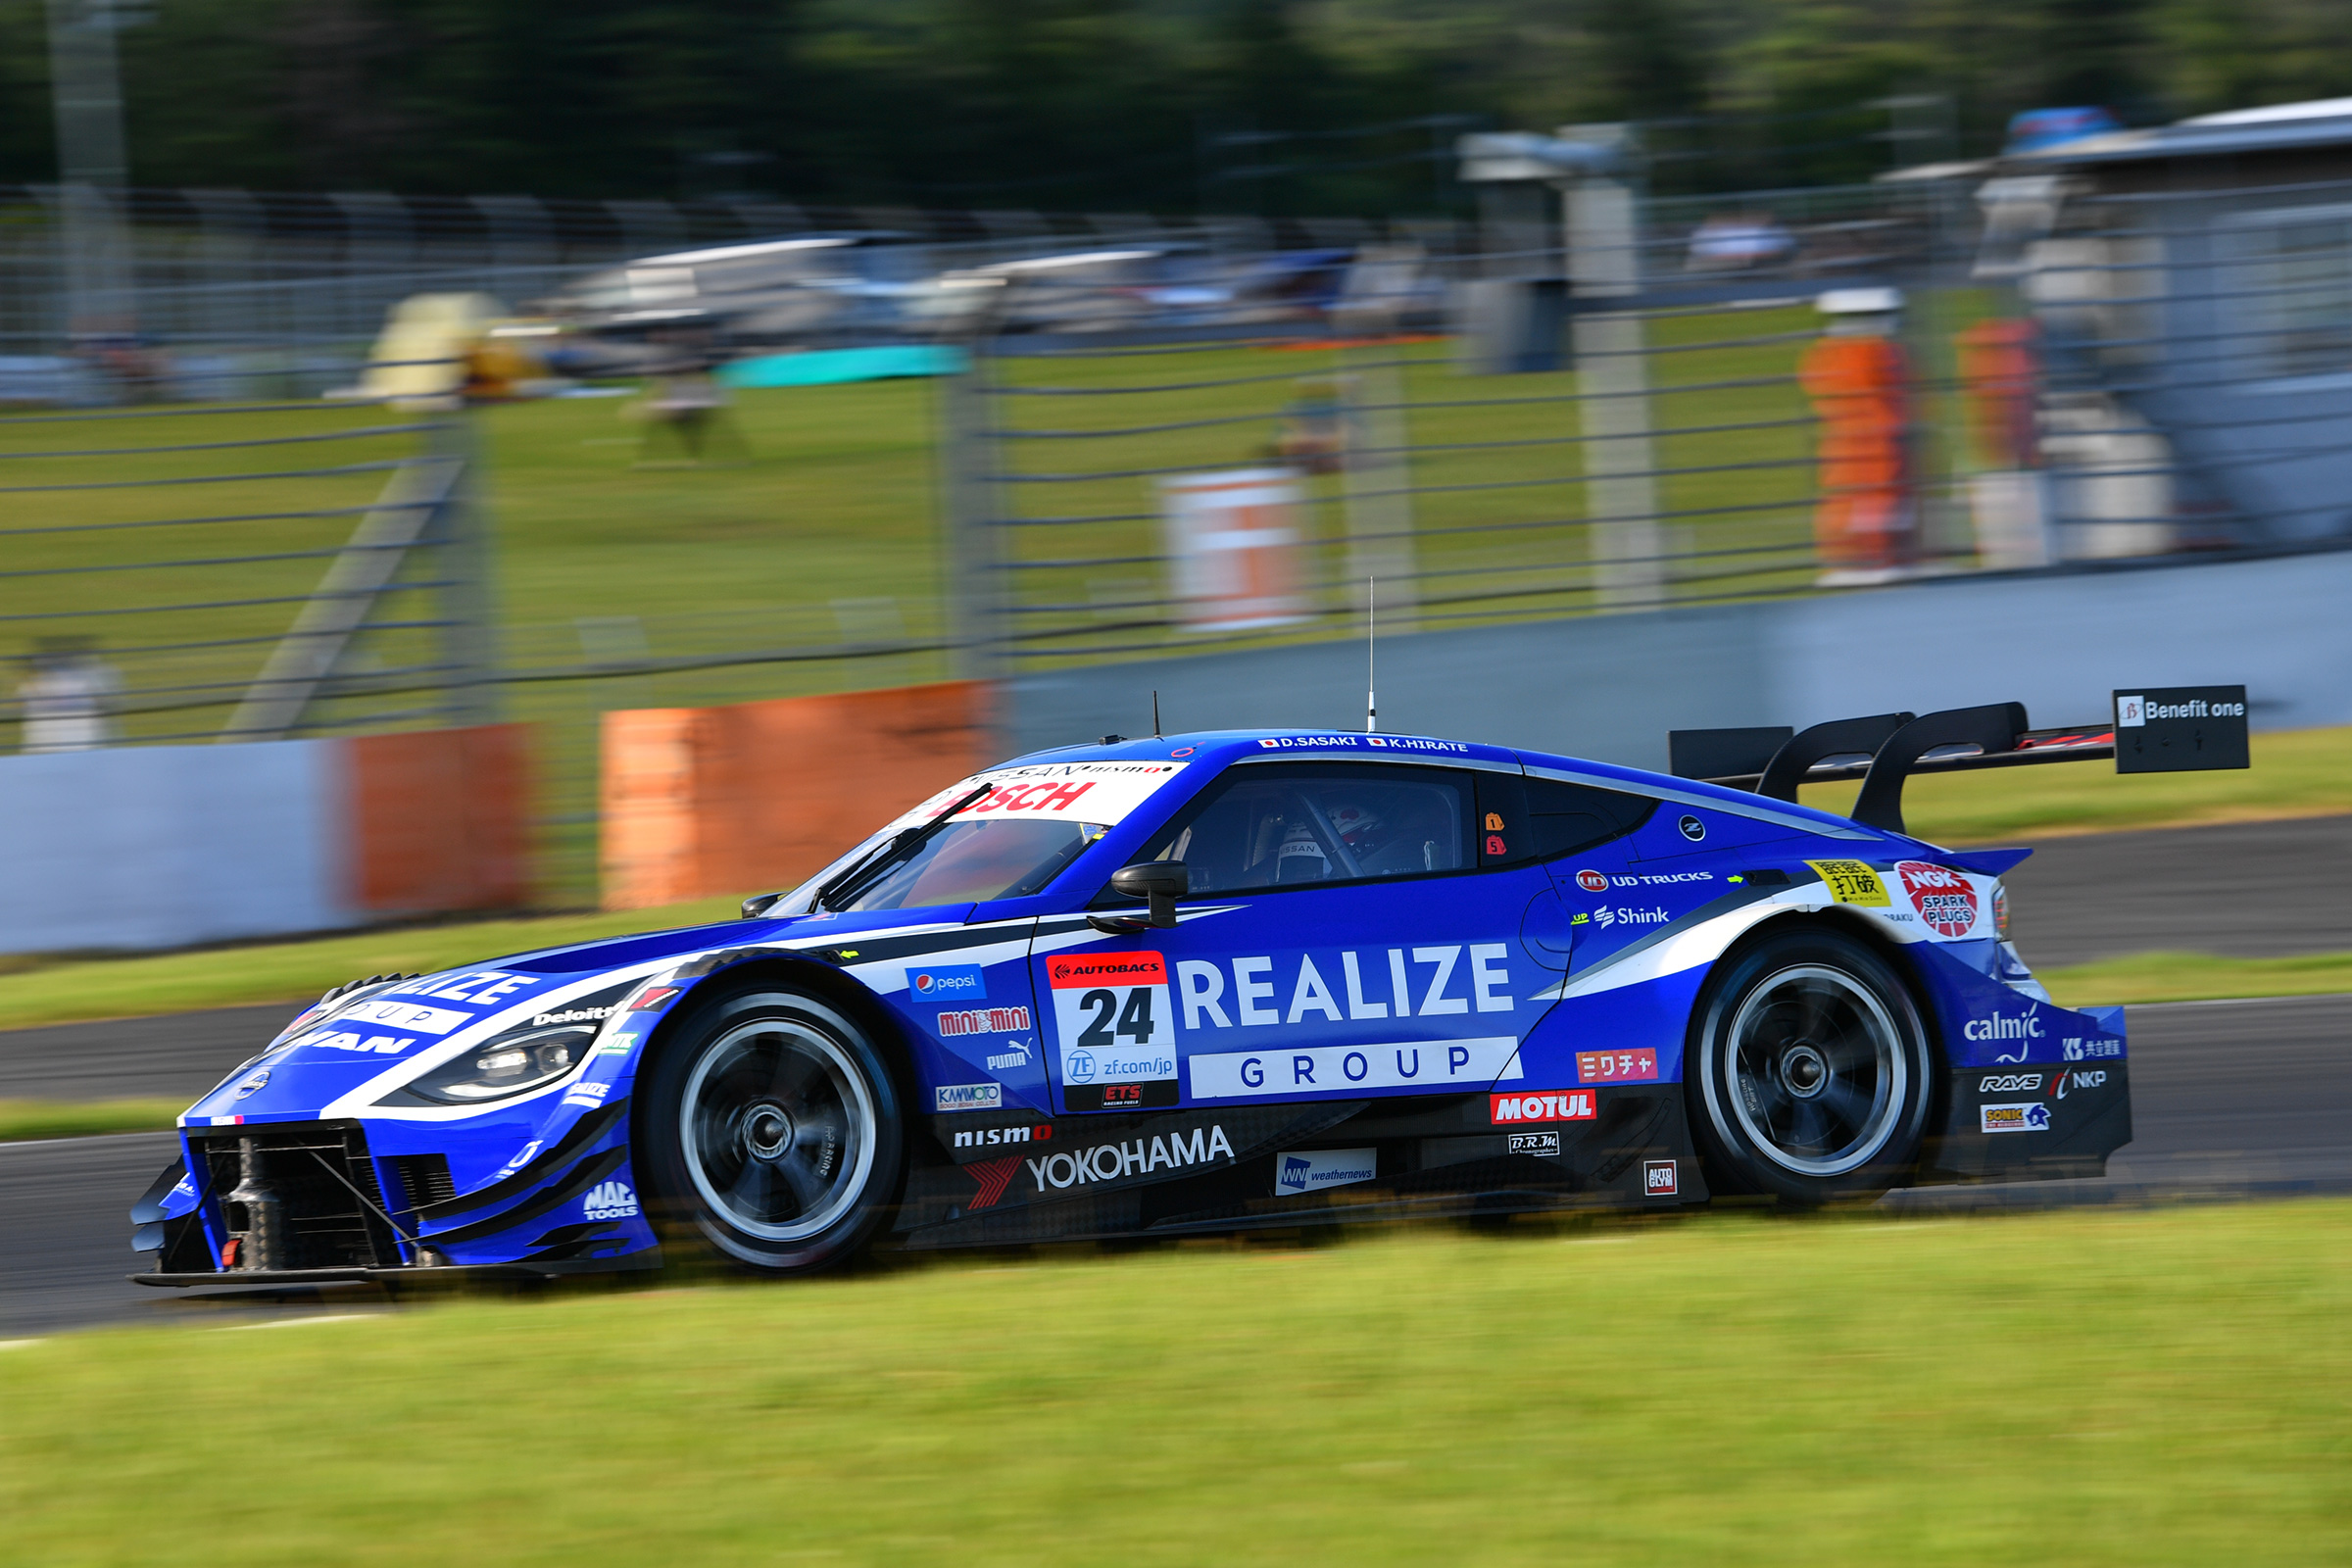 The REALIZE CORPORATION ADVAN Z wins pole position! In GT300, the 